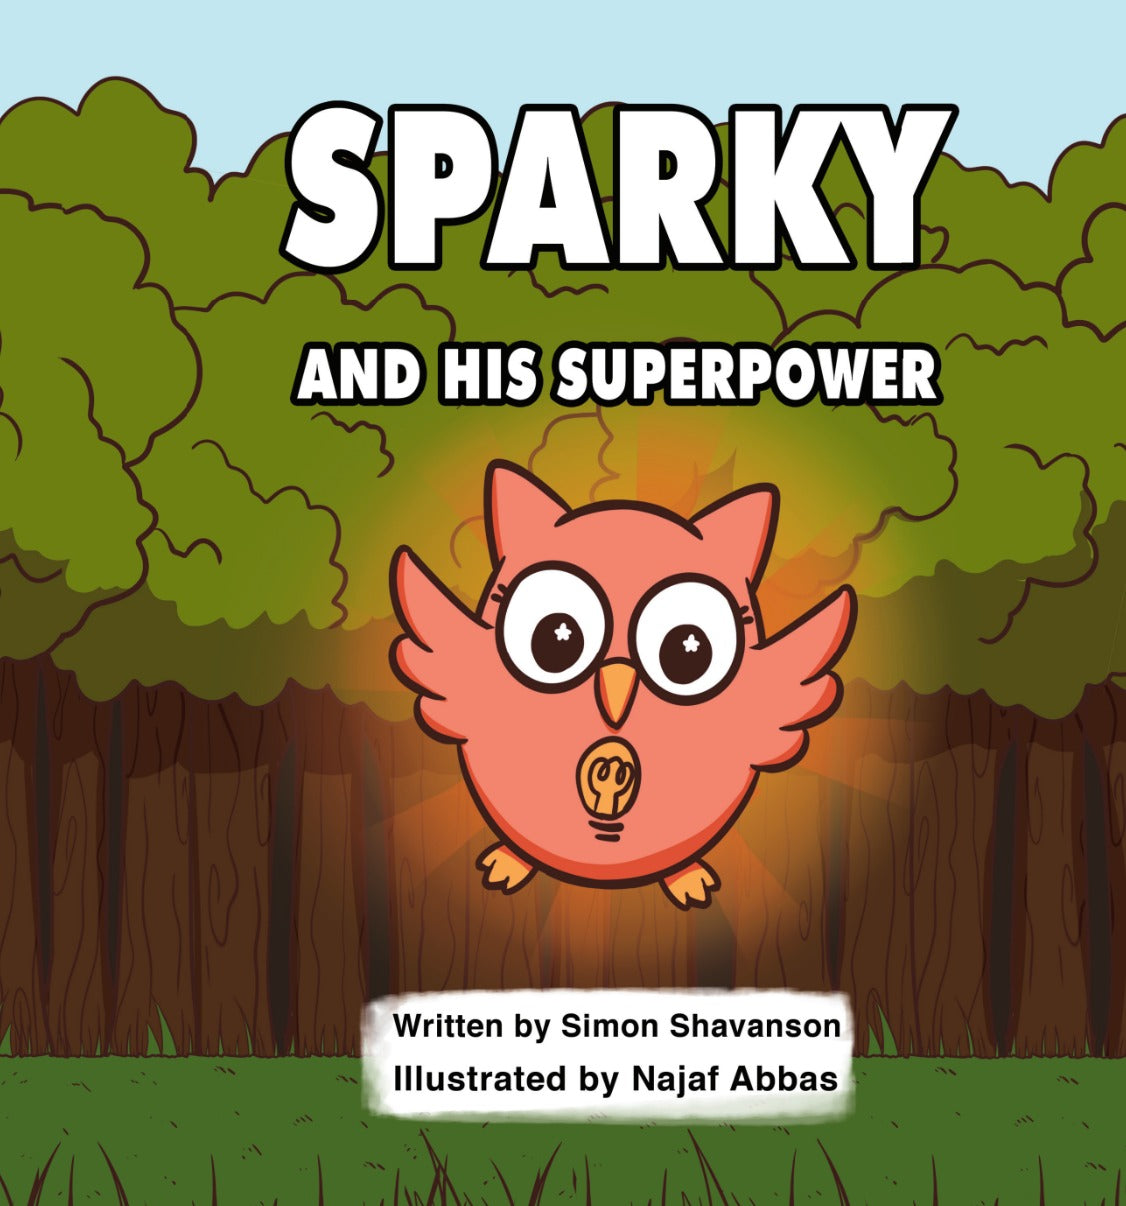 SPARKY AND HIS SUPERPOWER